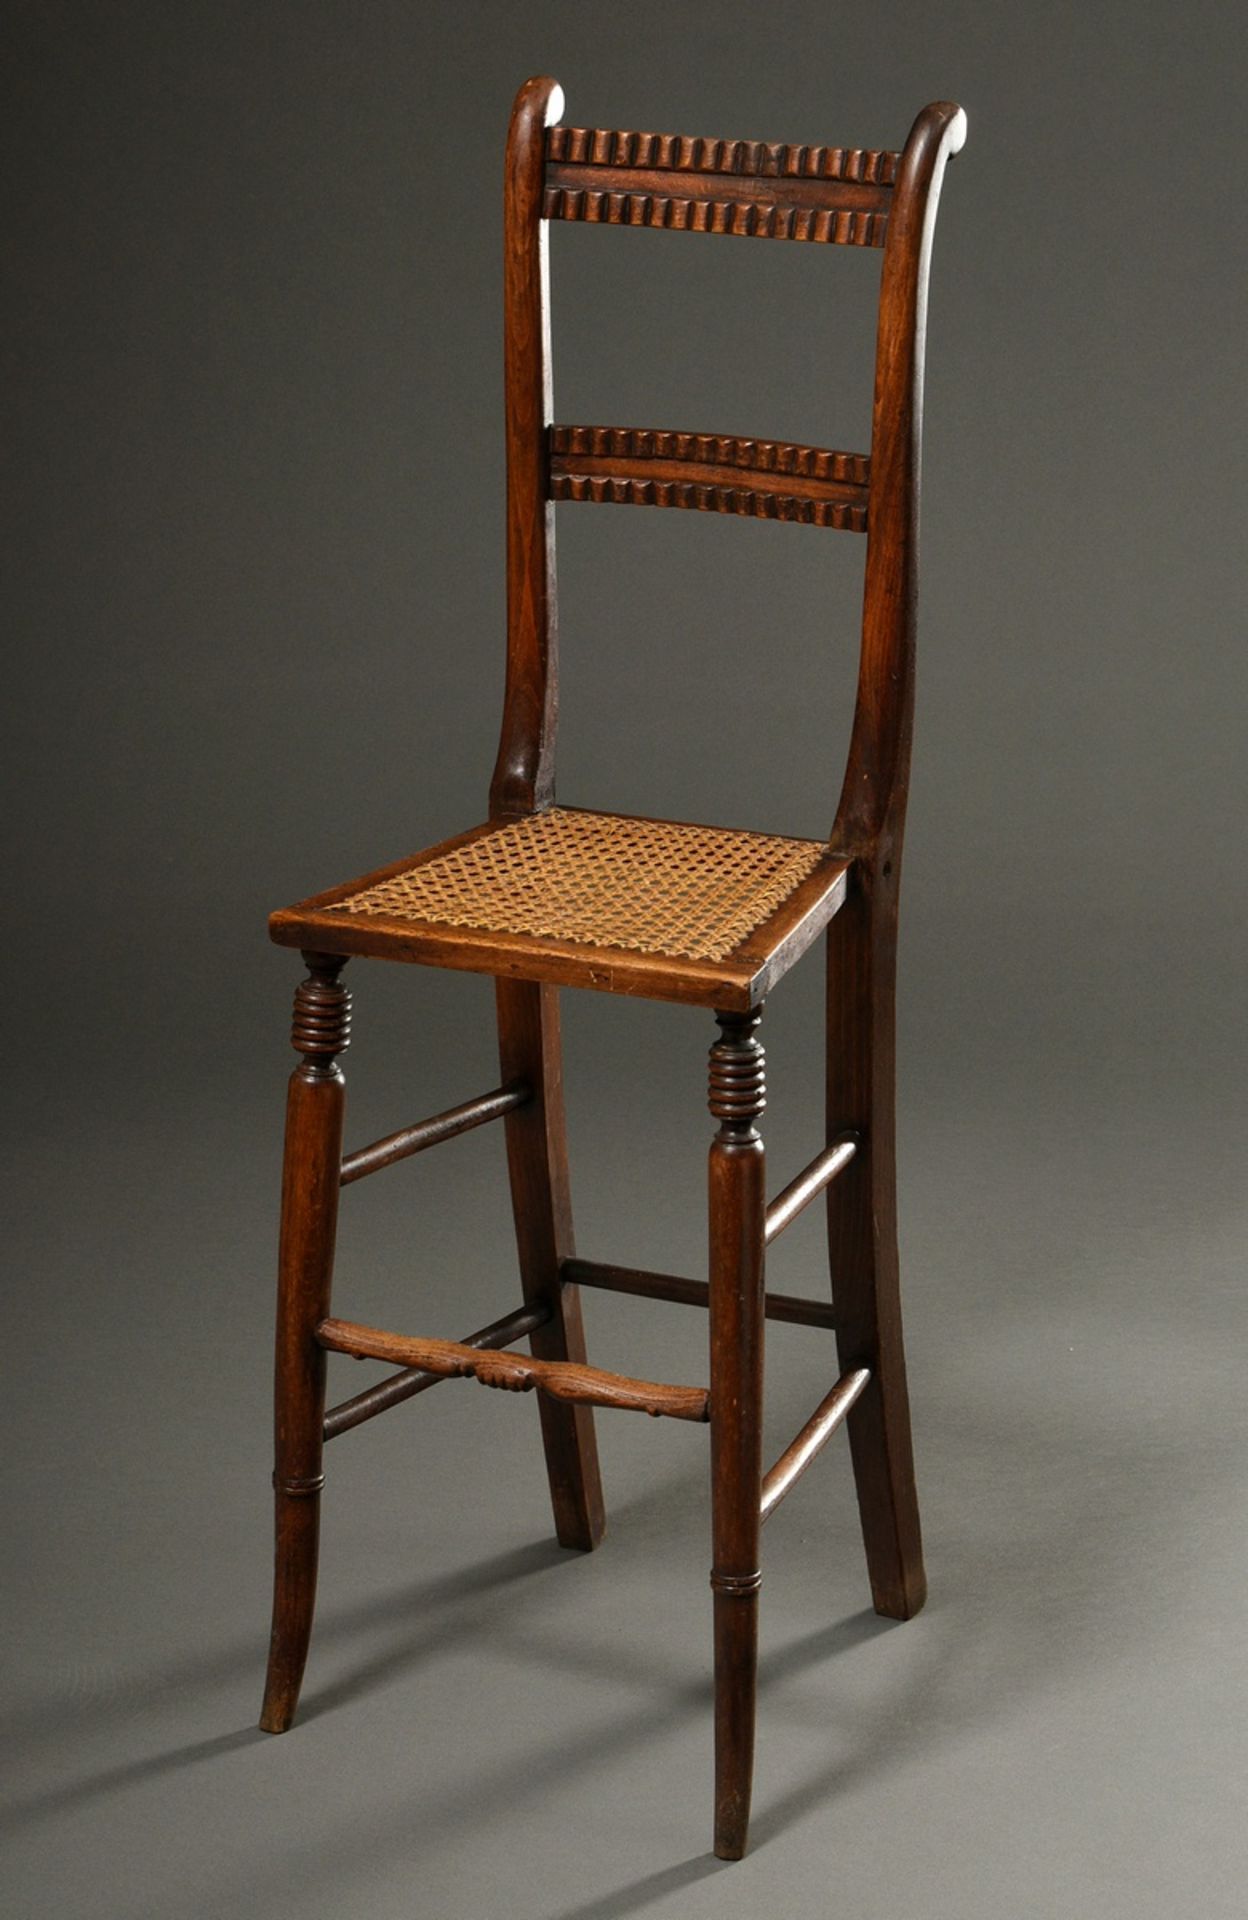 English children's high chair with lathed and carved frame and woven seat, 19th c., h. 54/100cm